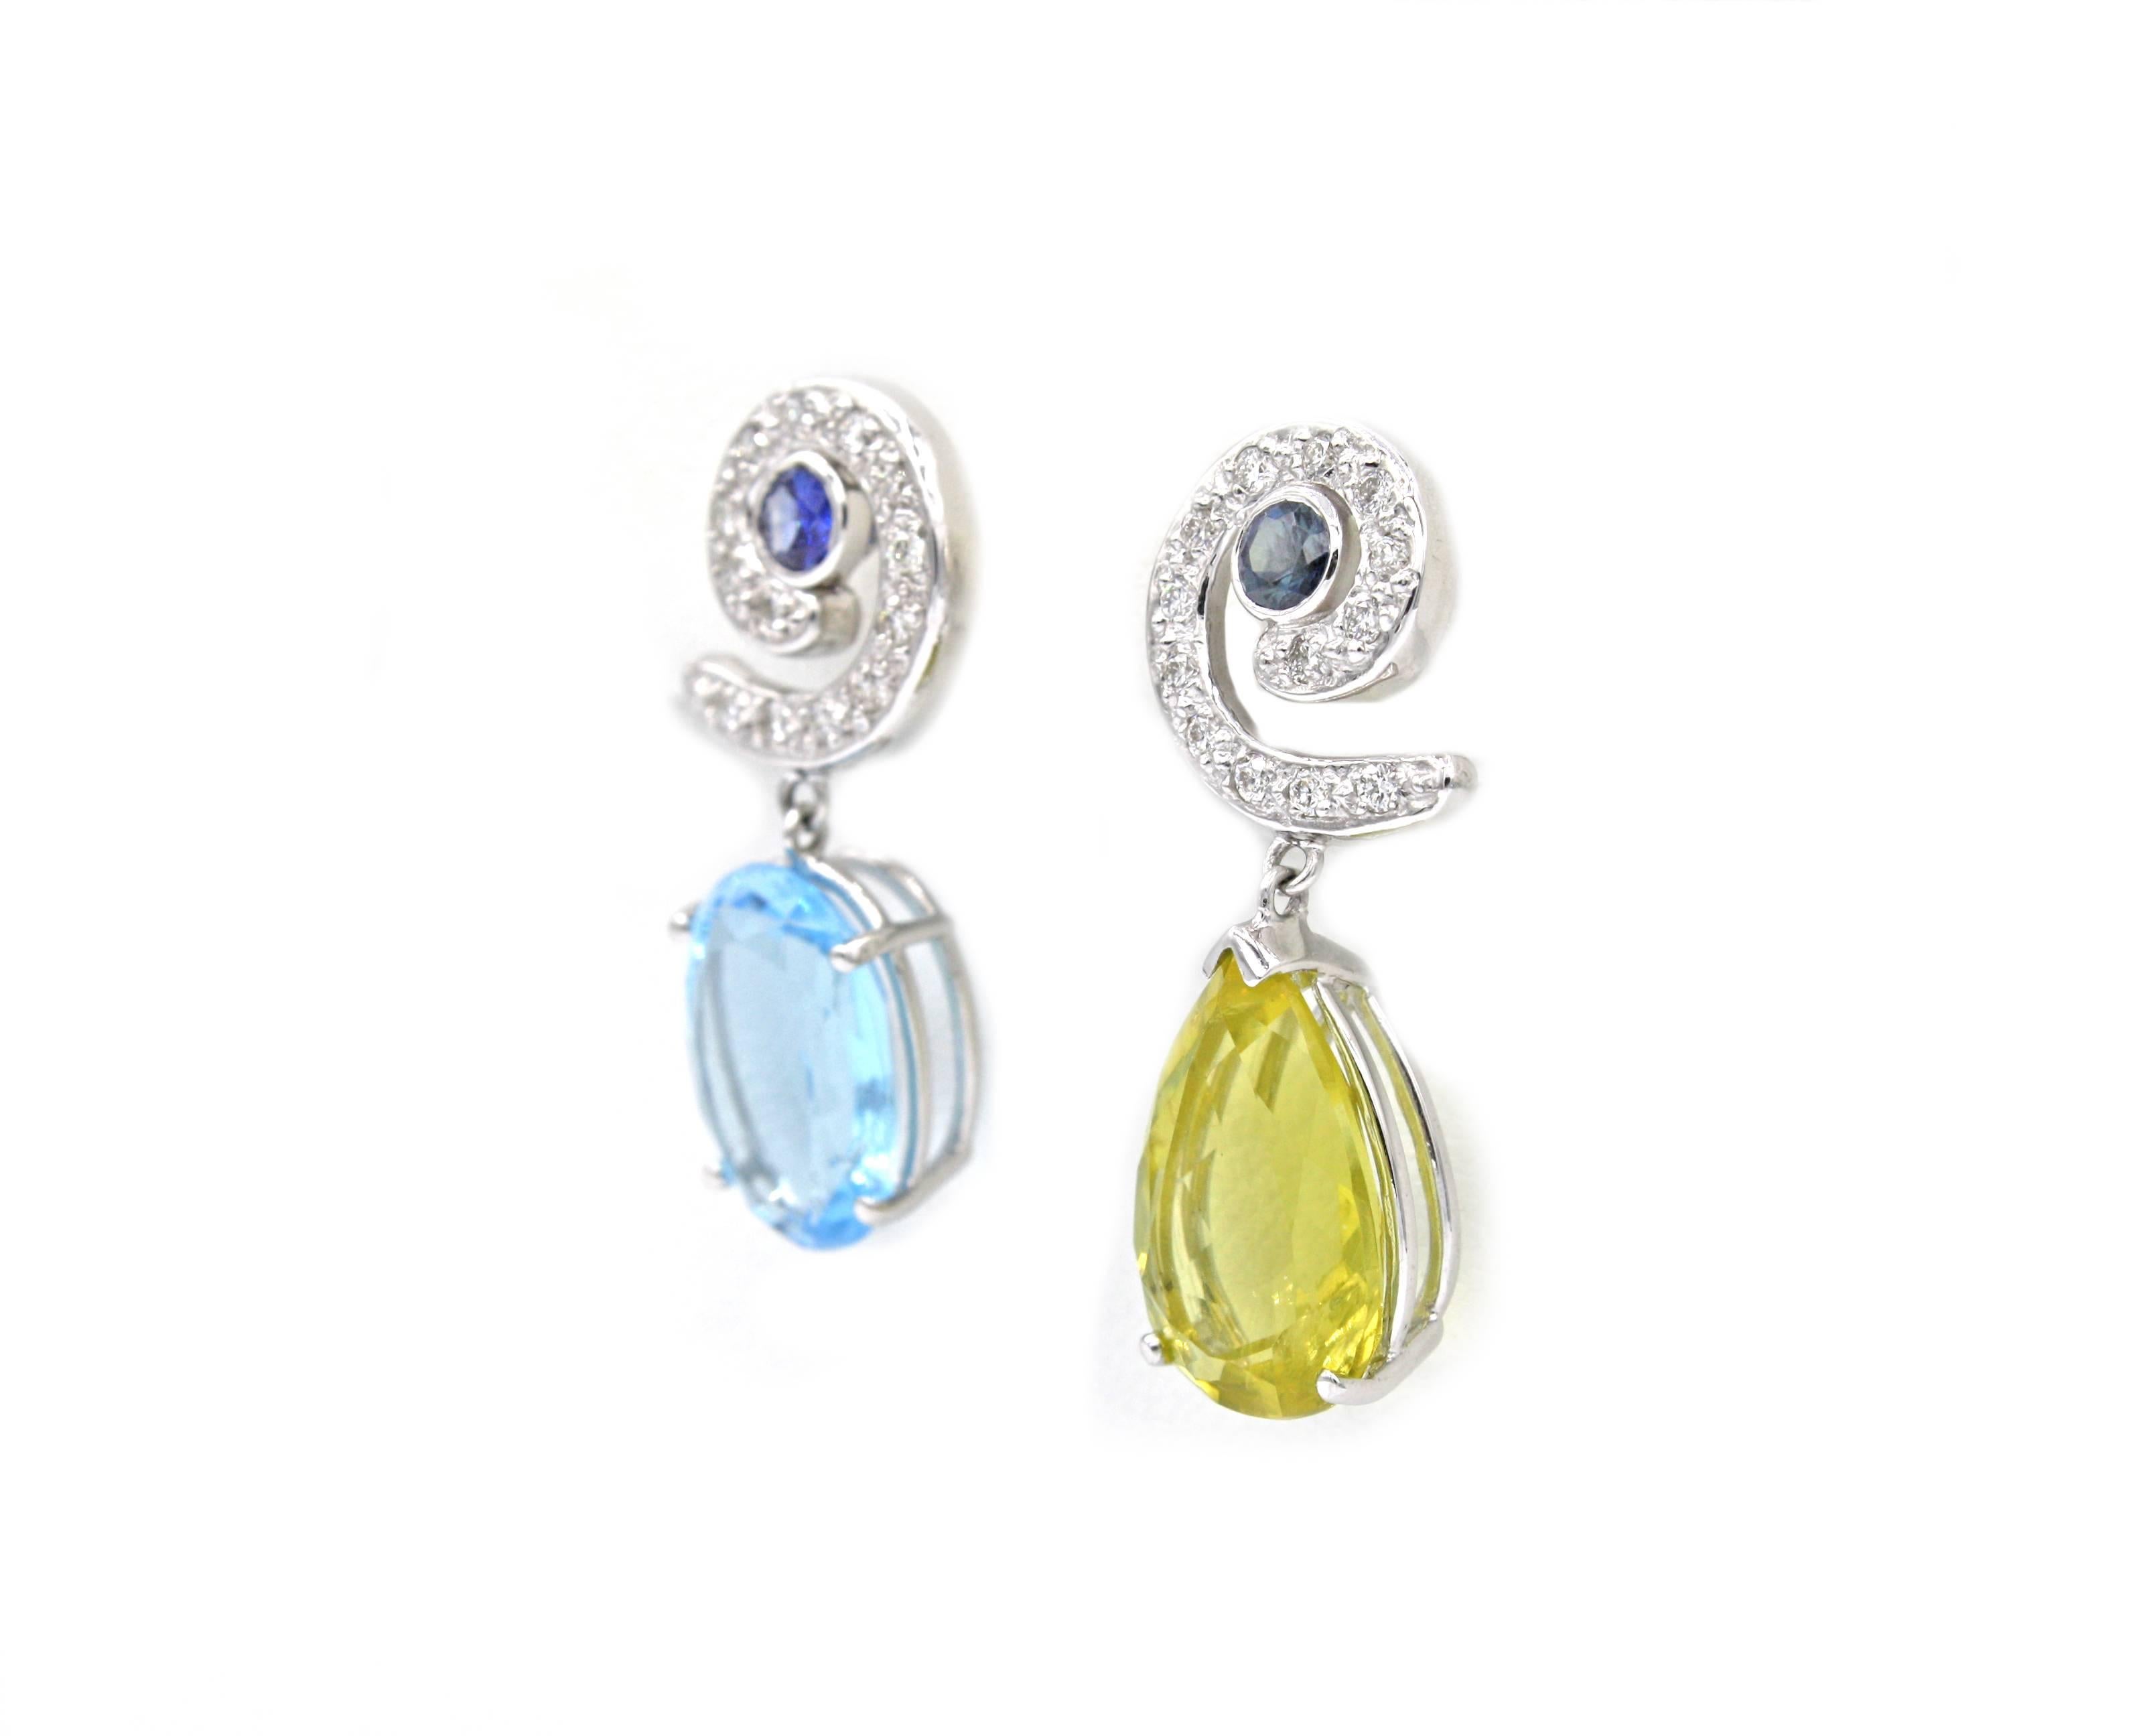 A unique pair of Renato Cipullo earrings, these feature differing yet complimentary stones.  The 5.5ct pear shape yellow beryl and 7ct oval shape blue topaz hang from 18k white gold spirals set with sapphires and 26 diamonds.  